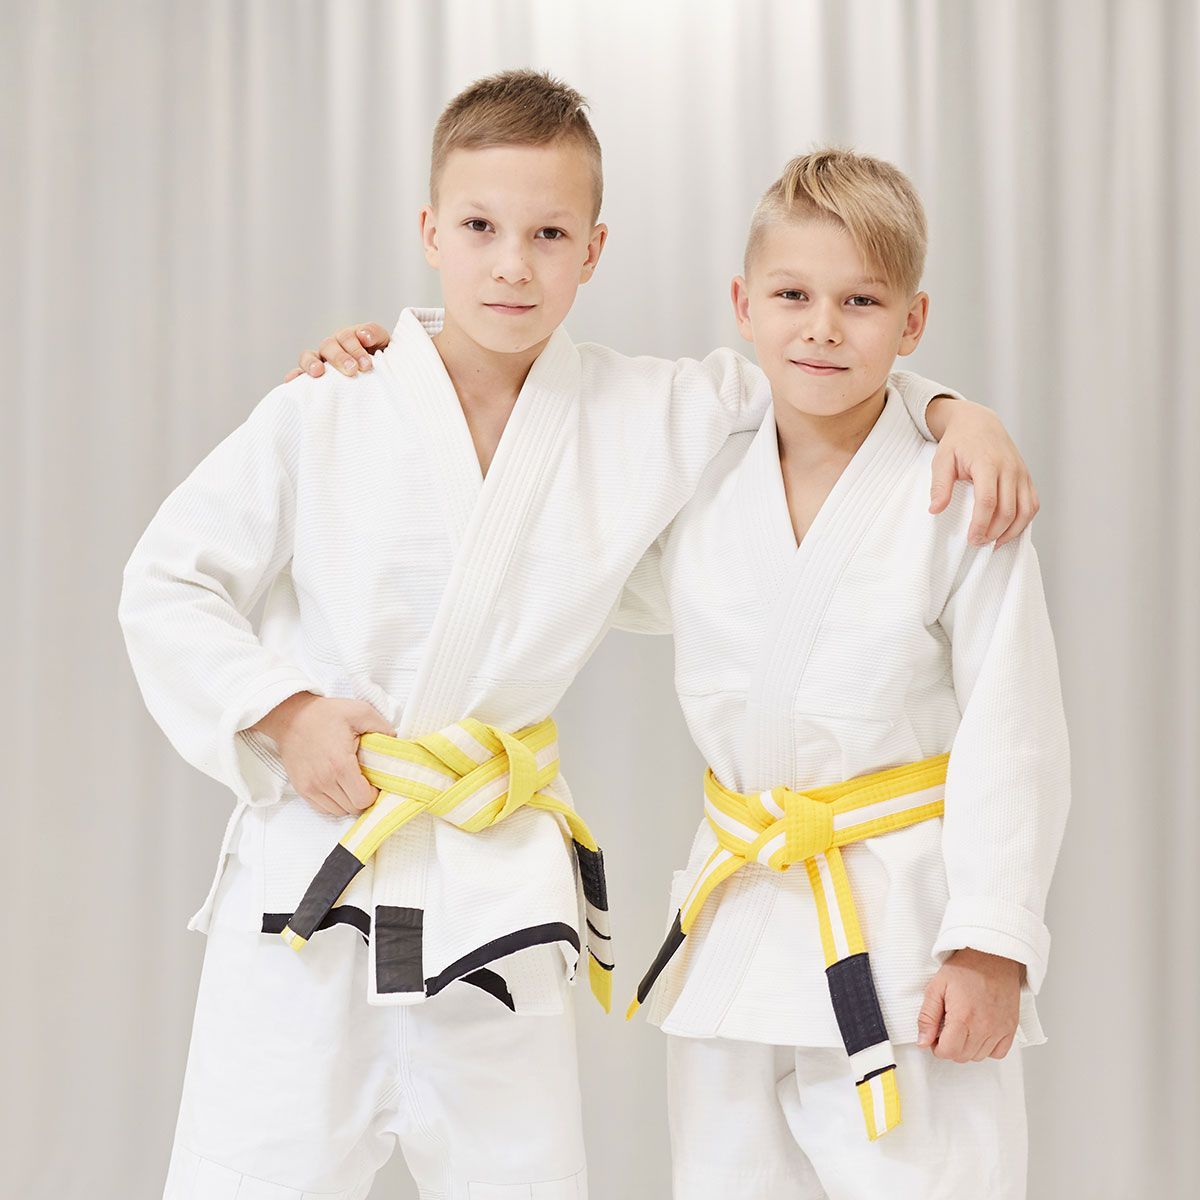 two young boys wearing white karate uniforms with yellow belts